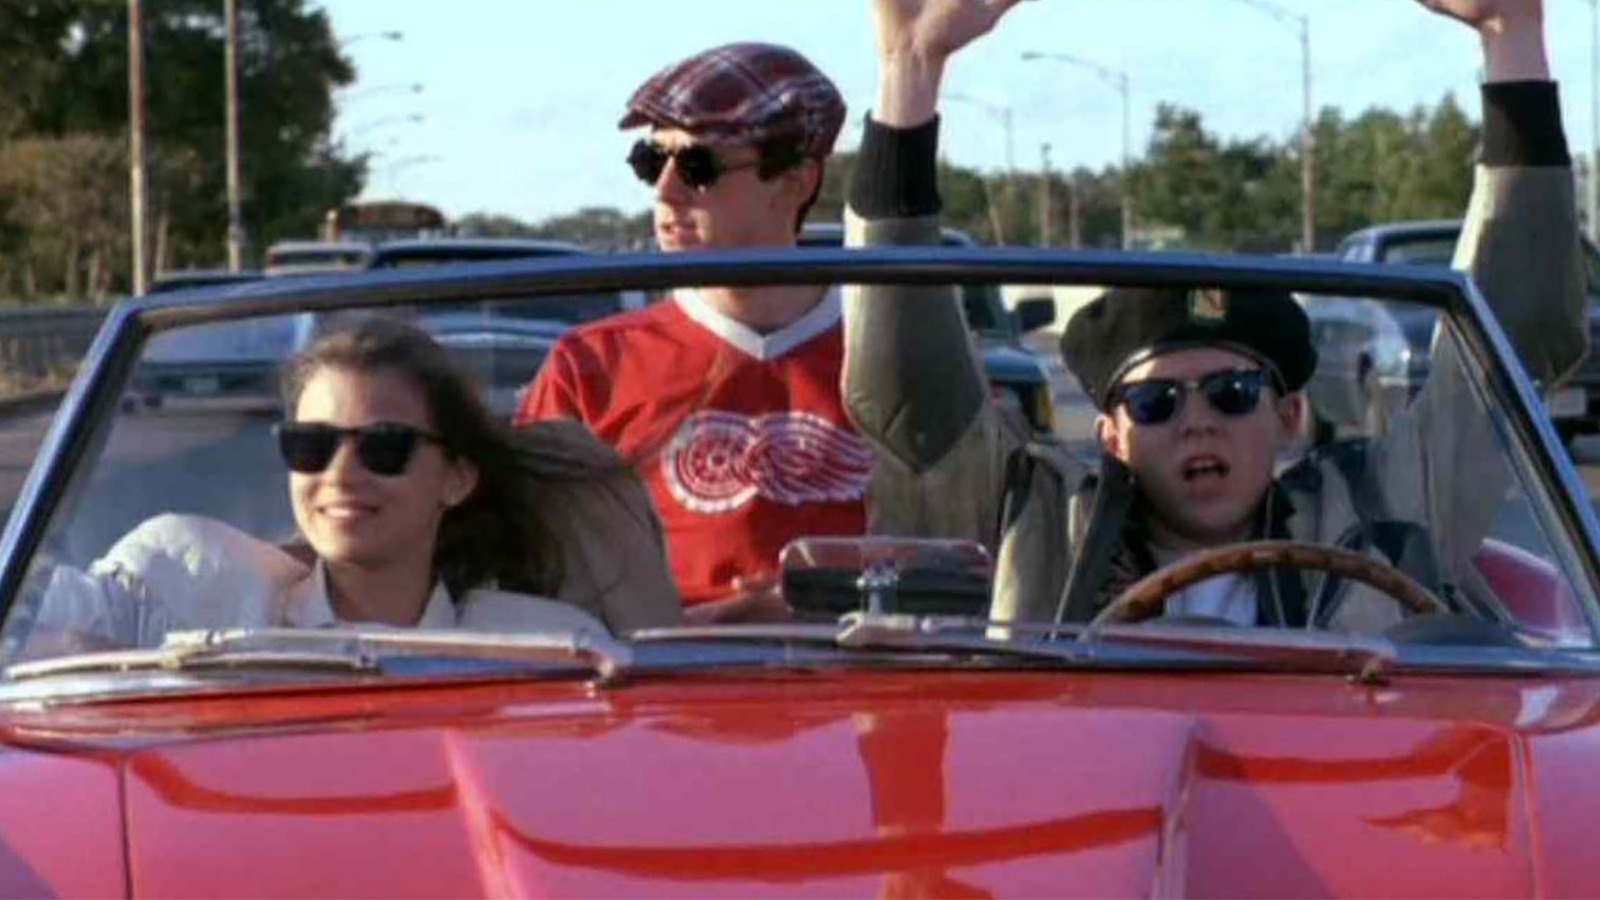 Ferris Bueller's Day Off' at 35: Behind the scenes secrets